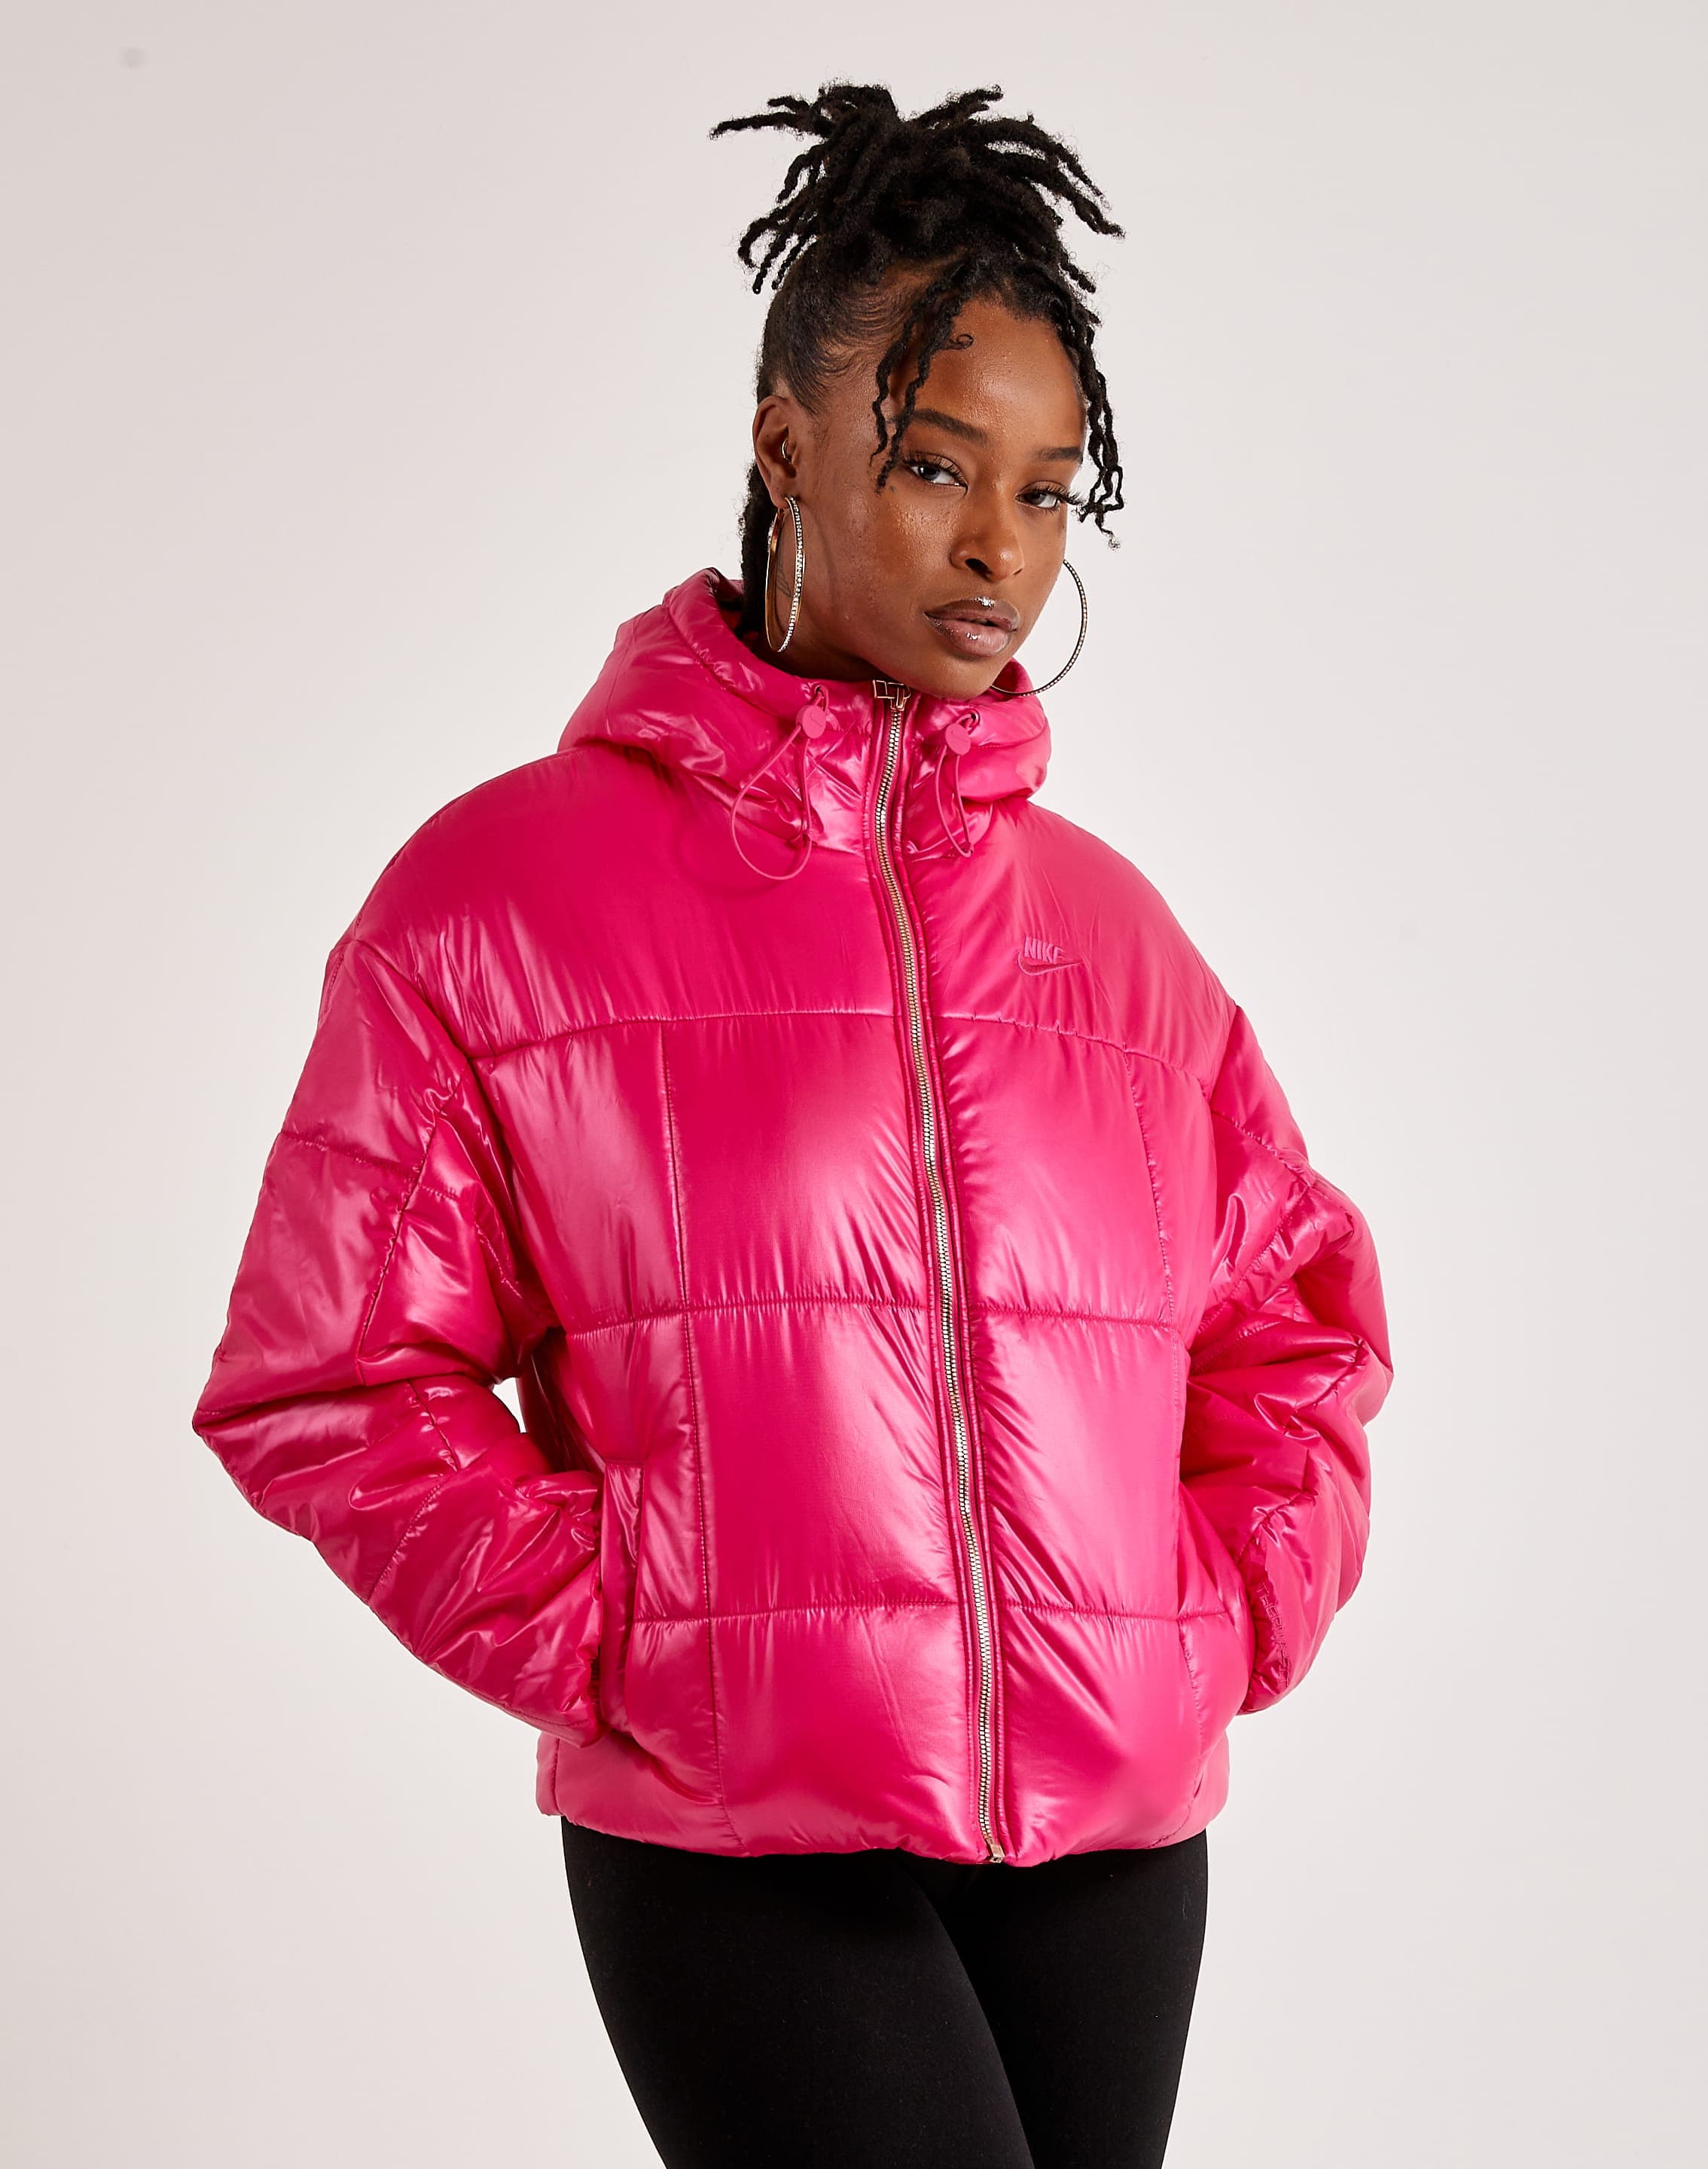 Nike Classic Puffer Shine Jacket – DTLR